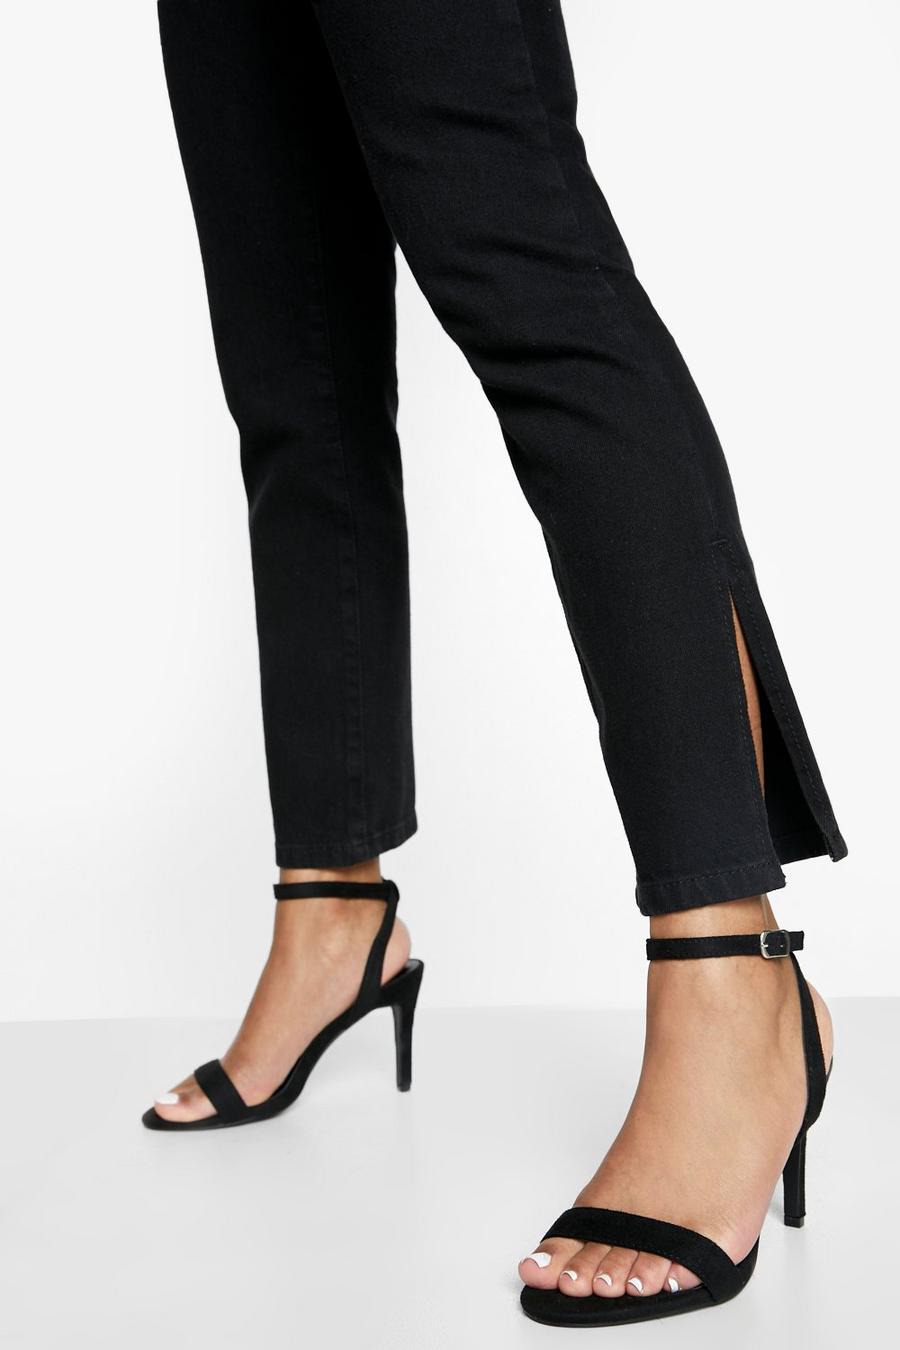 Black svart Low Barely There Heels